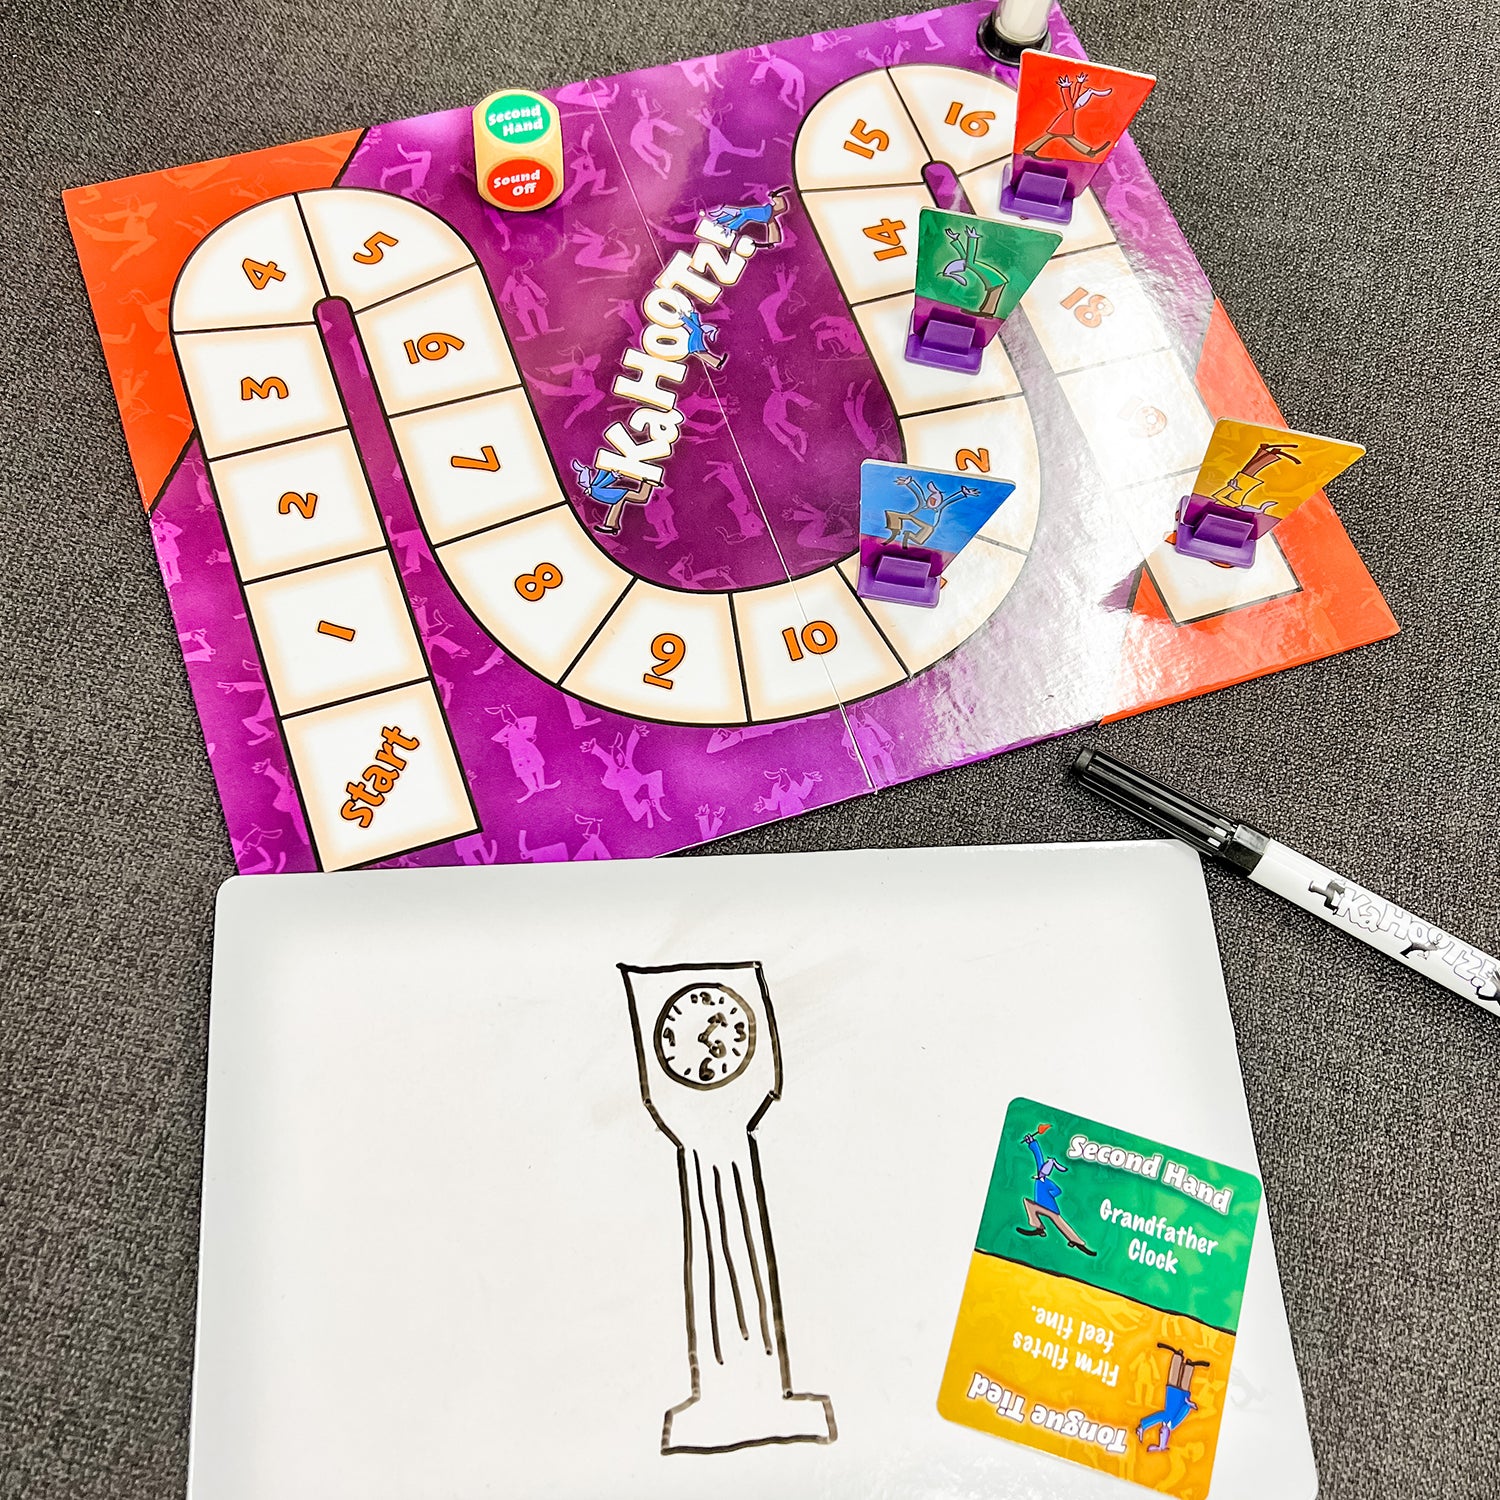 Kahootz! by SimplyFun is a fun family game and collaborative game focusing on creativity and teamwork.